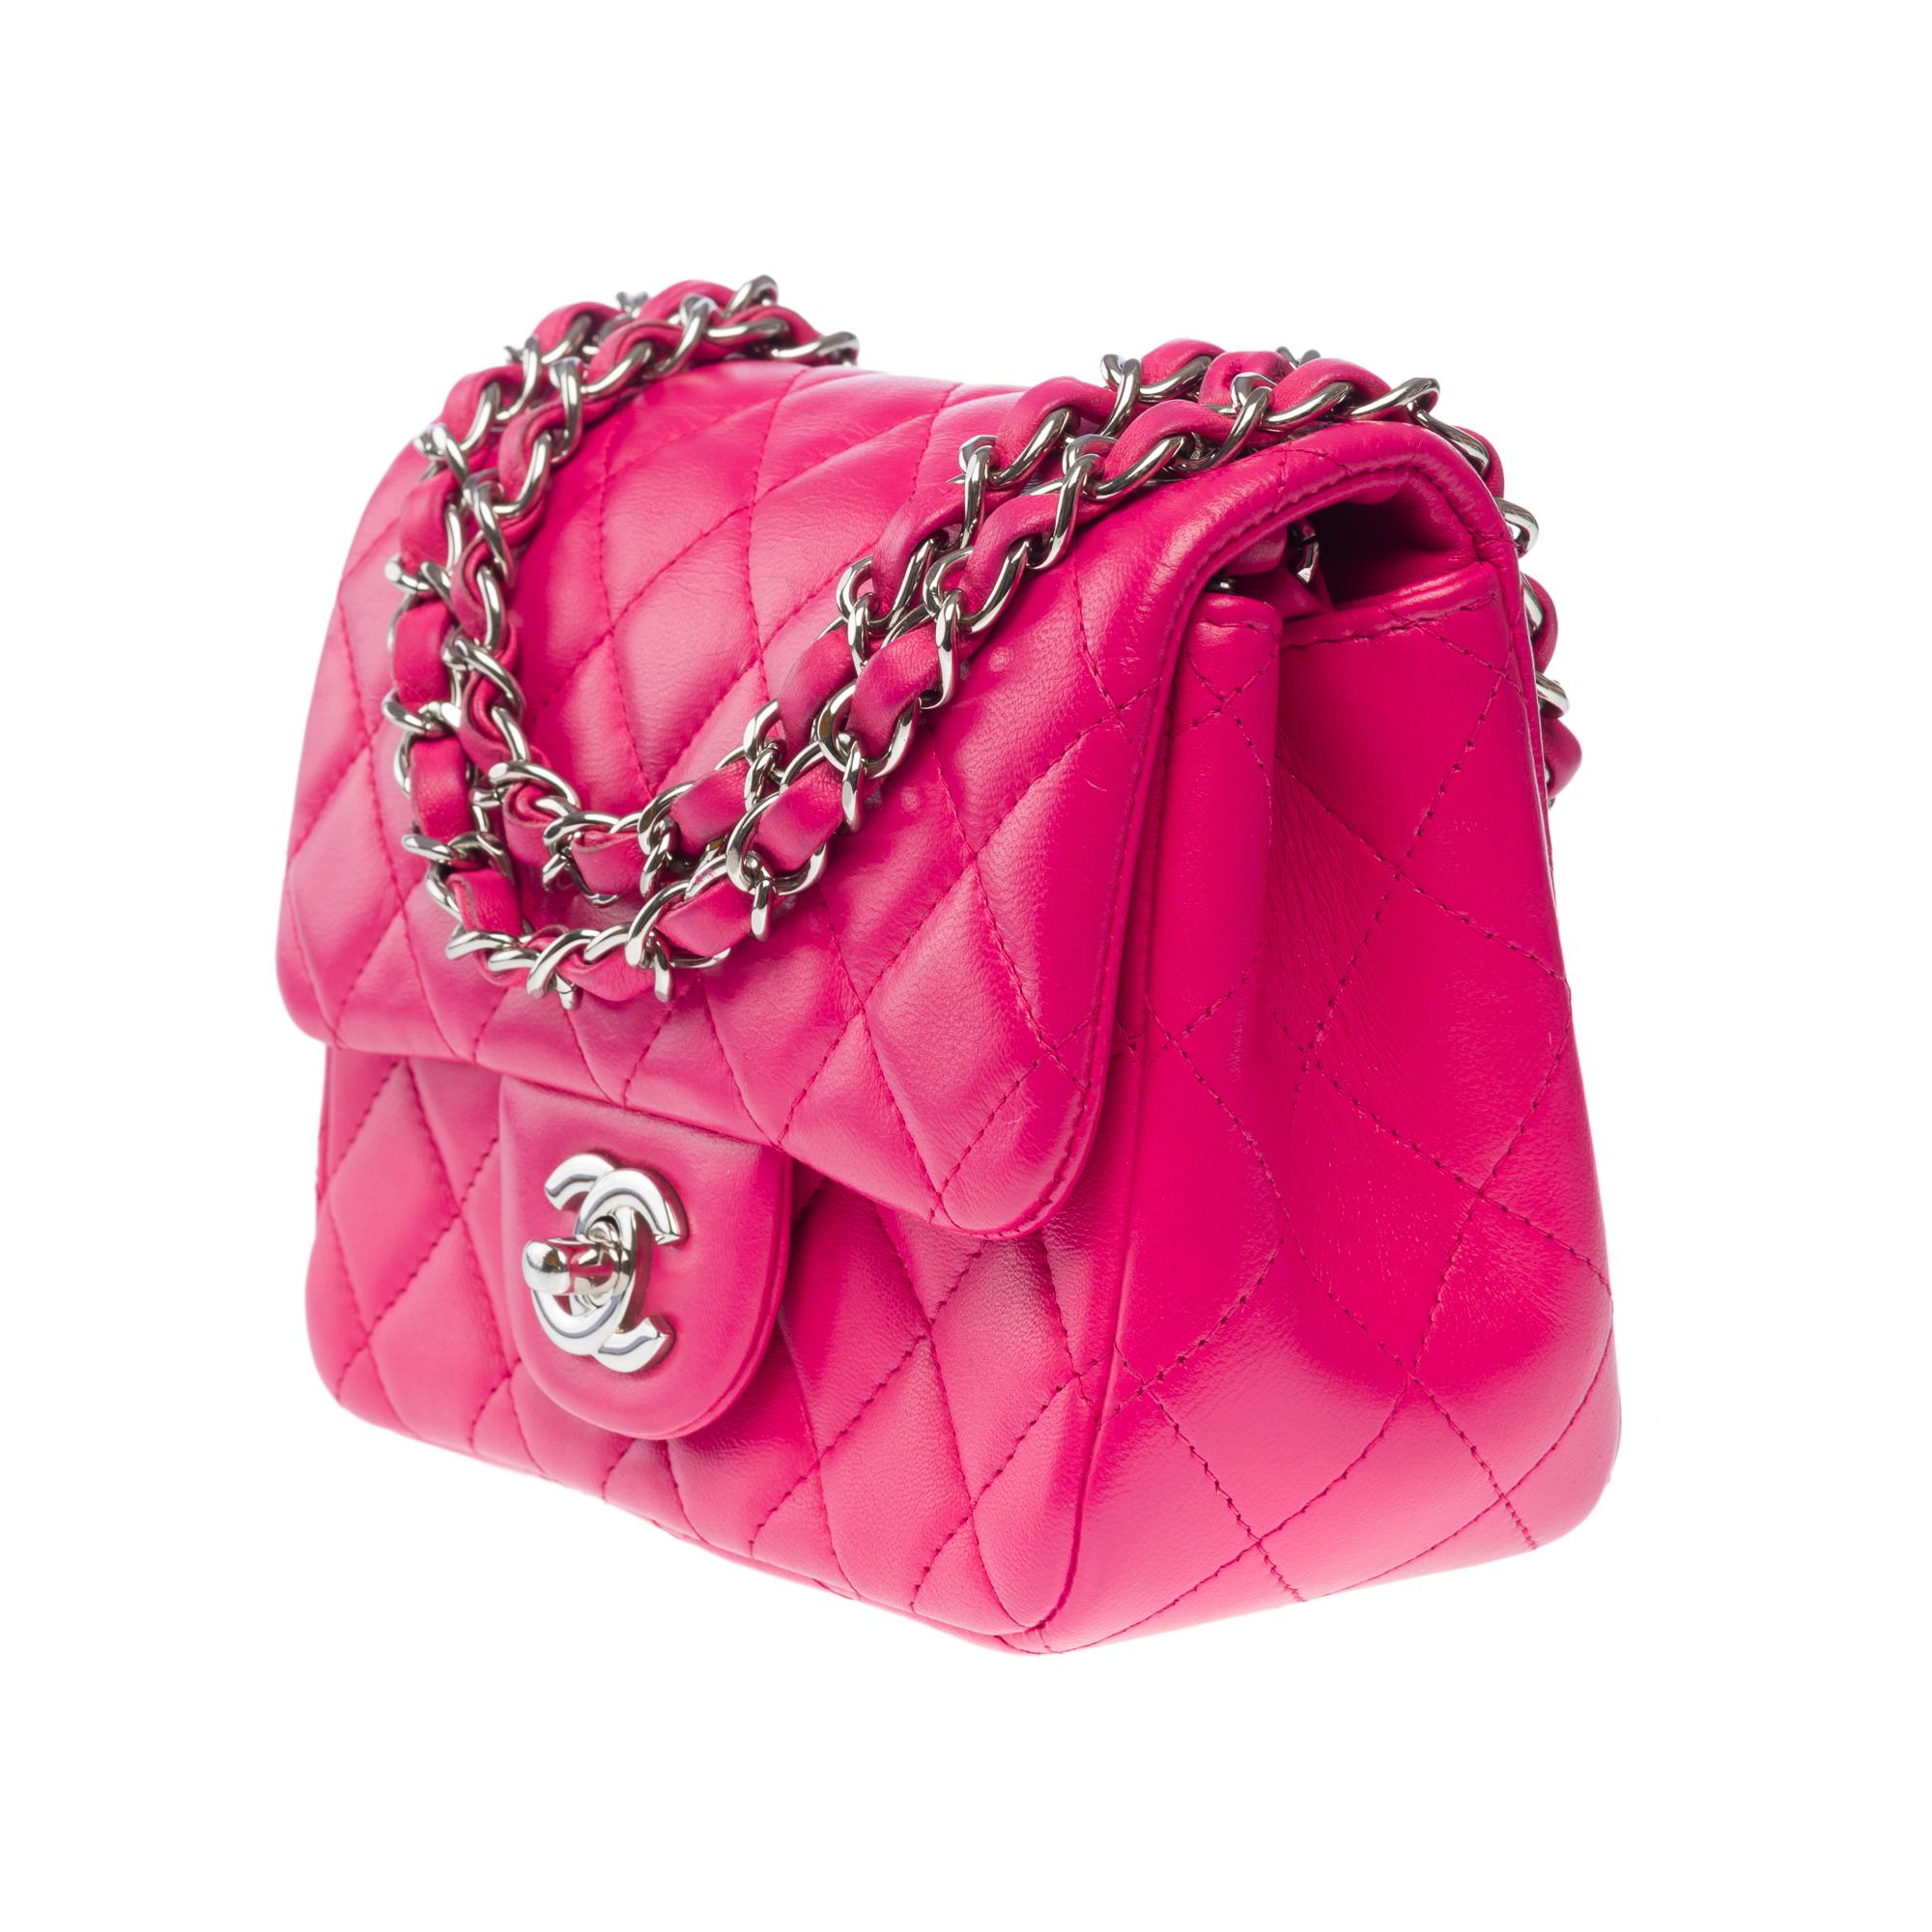 Women's Gorgeous Chanel Mini Timeless Shoulder flap bag in Pink quilted leather, SHW